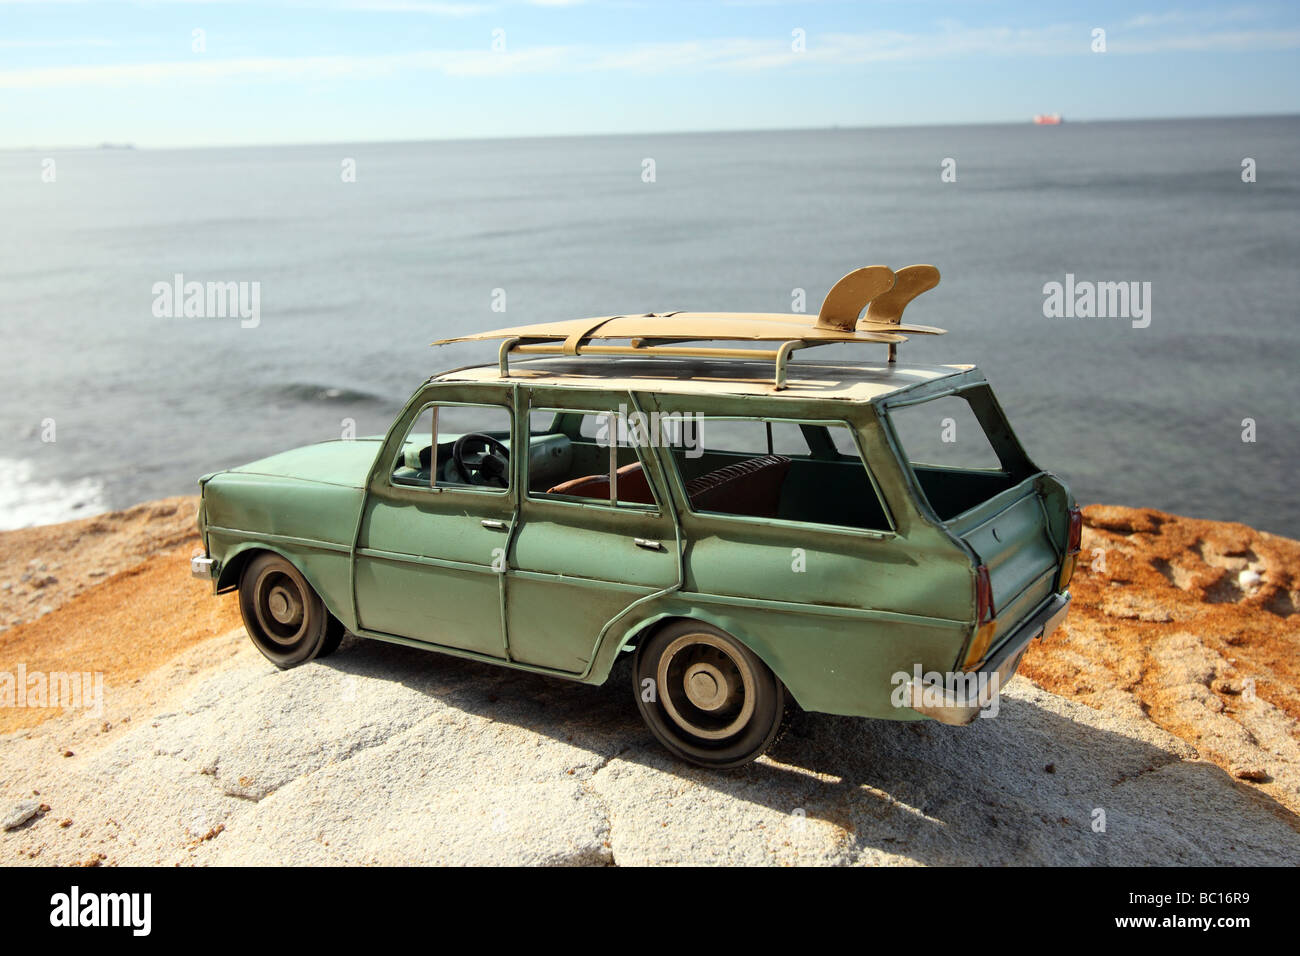 BEATEN UP OLD MODEL STATION WAGON WITH SURFBOARDS ON TOP BDB11232  HORIZONTAL Stock Photo